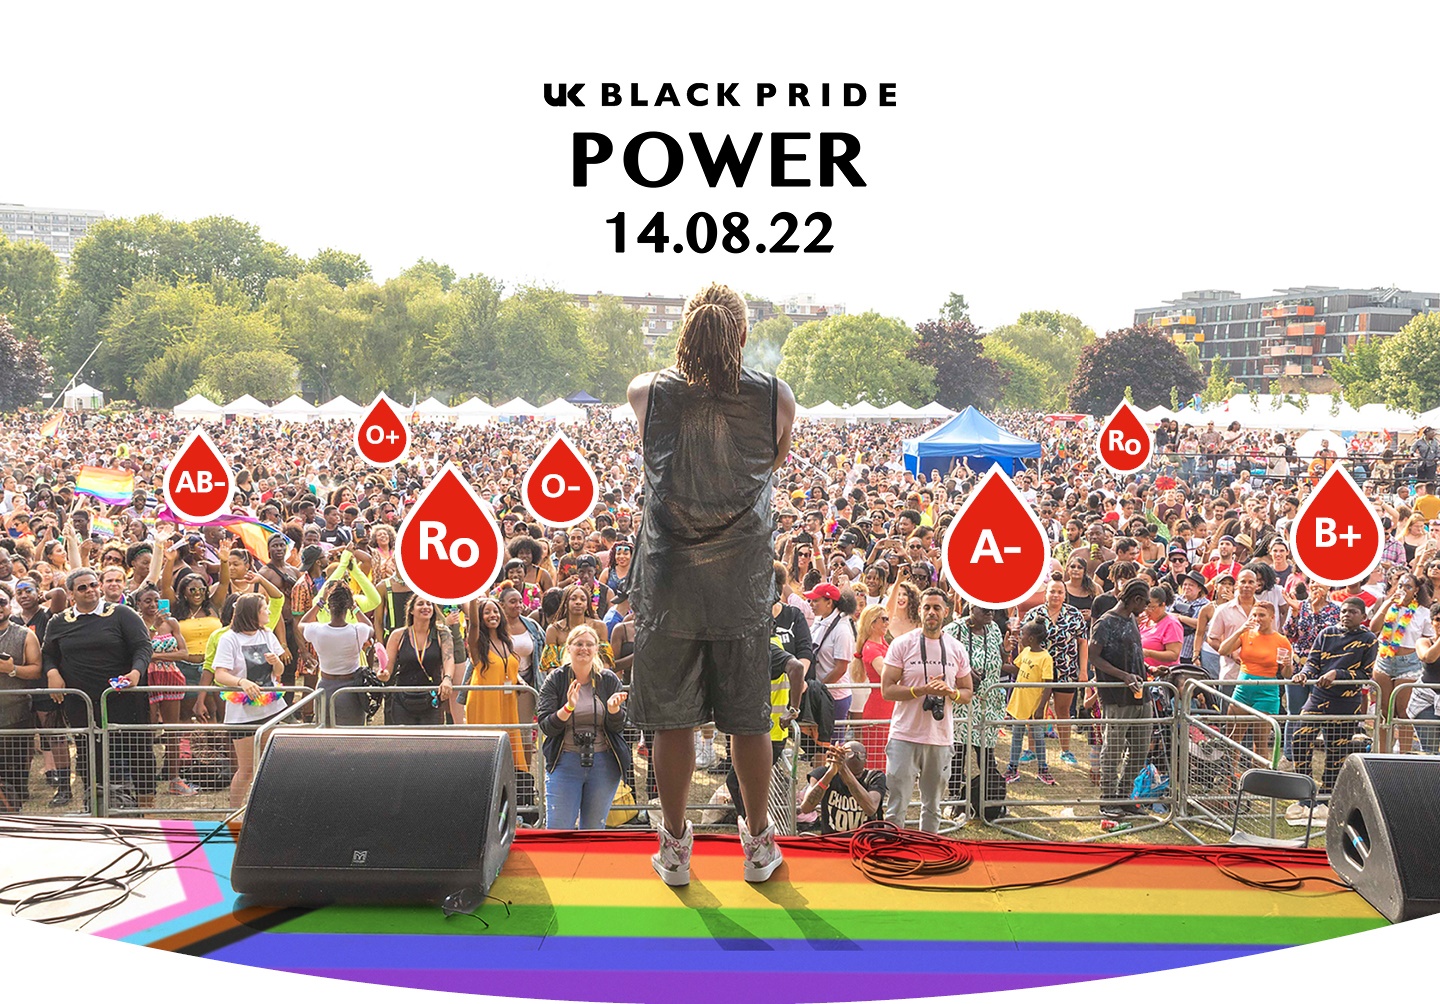 Man performing on stage at Pride festival. Some audience members have their blood group labelled